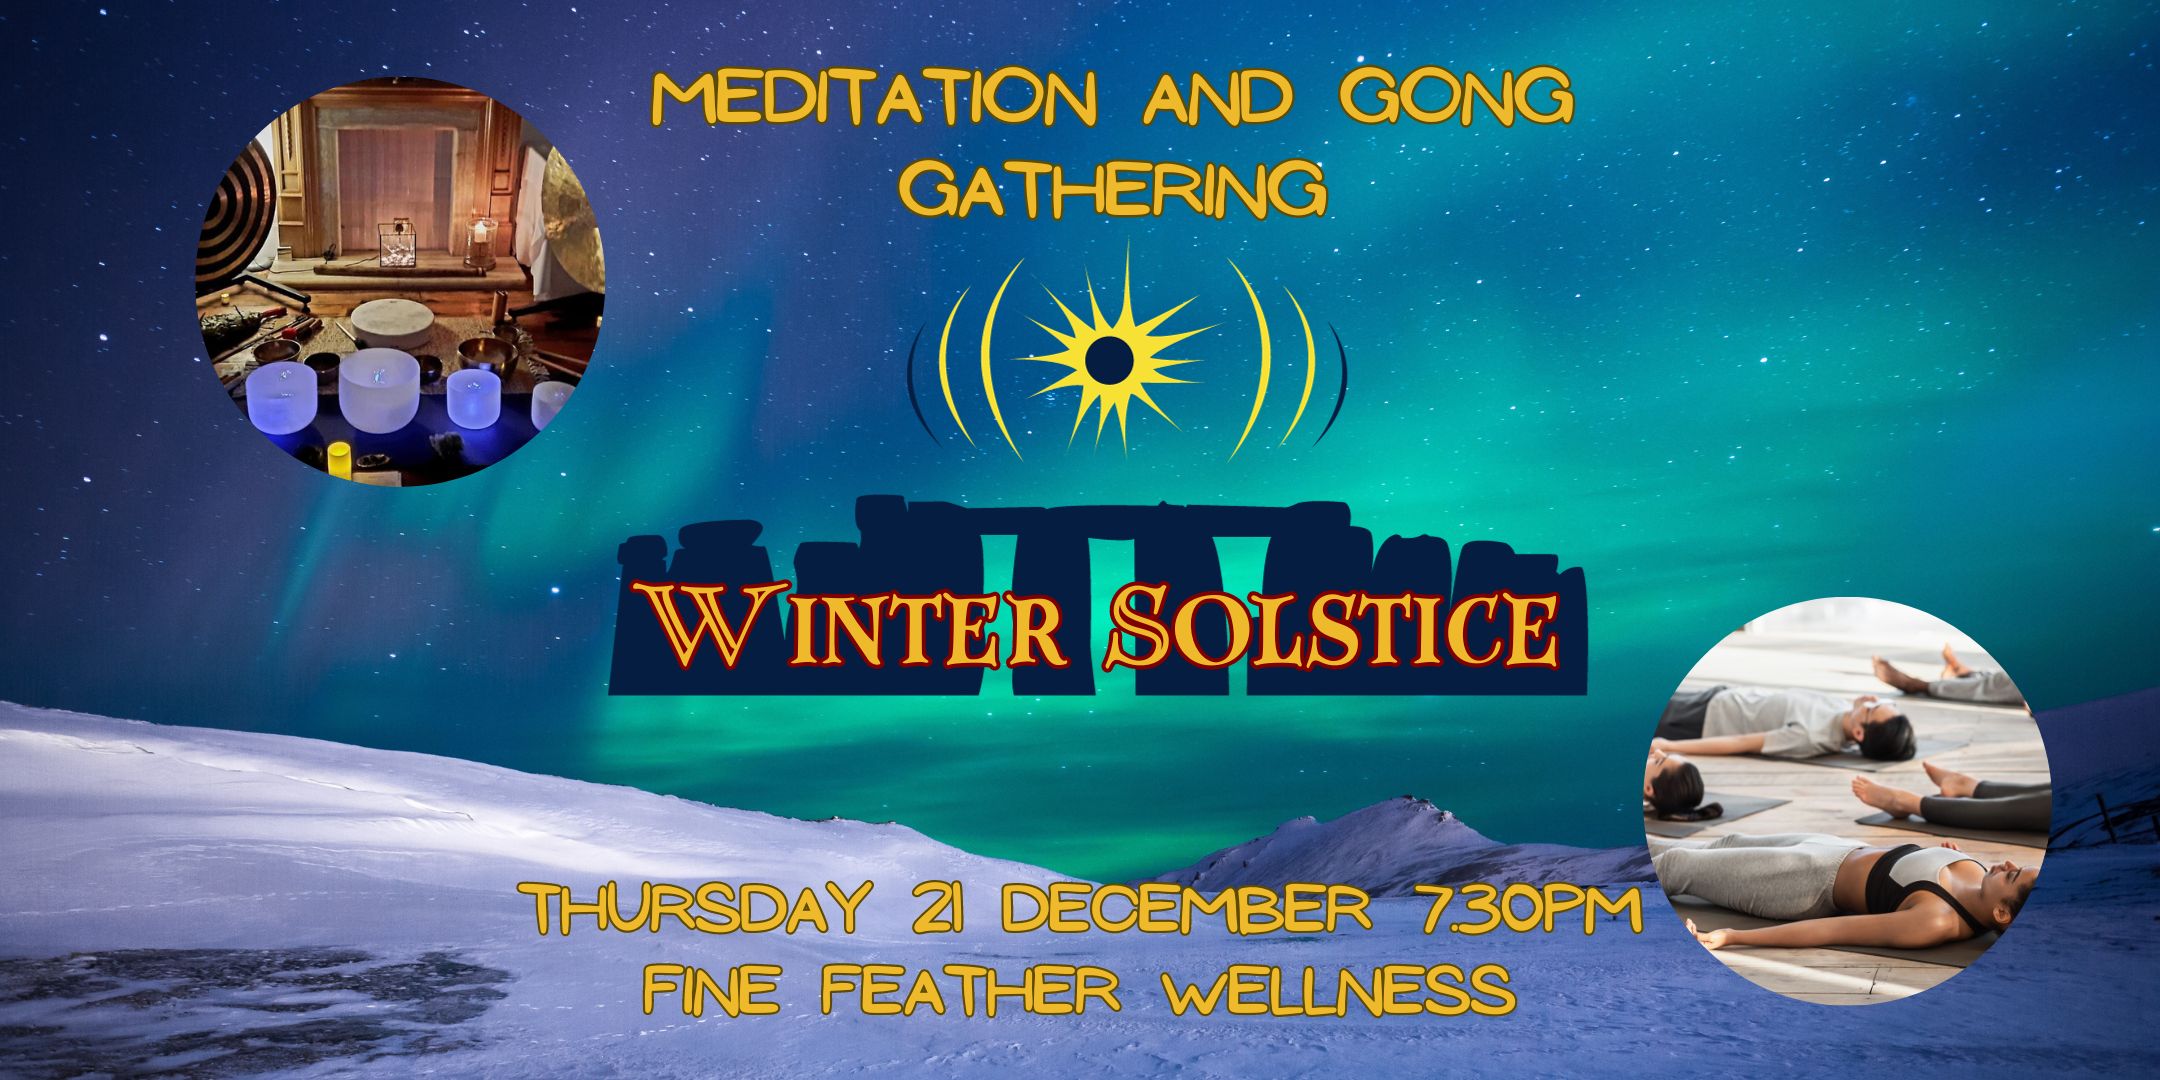 EAST SUSSEX, HOVE - Winter Solstice Meditation and Gong Gathering